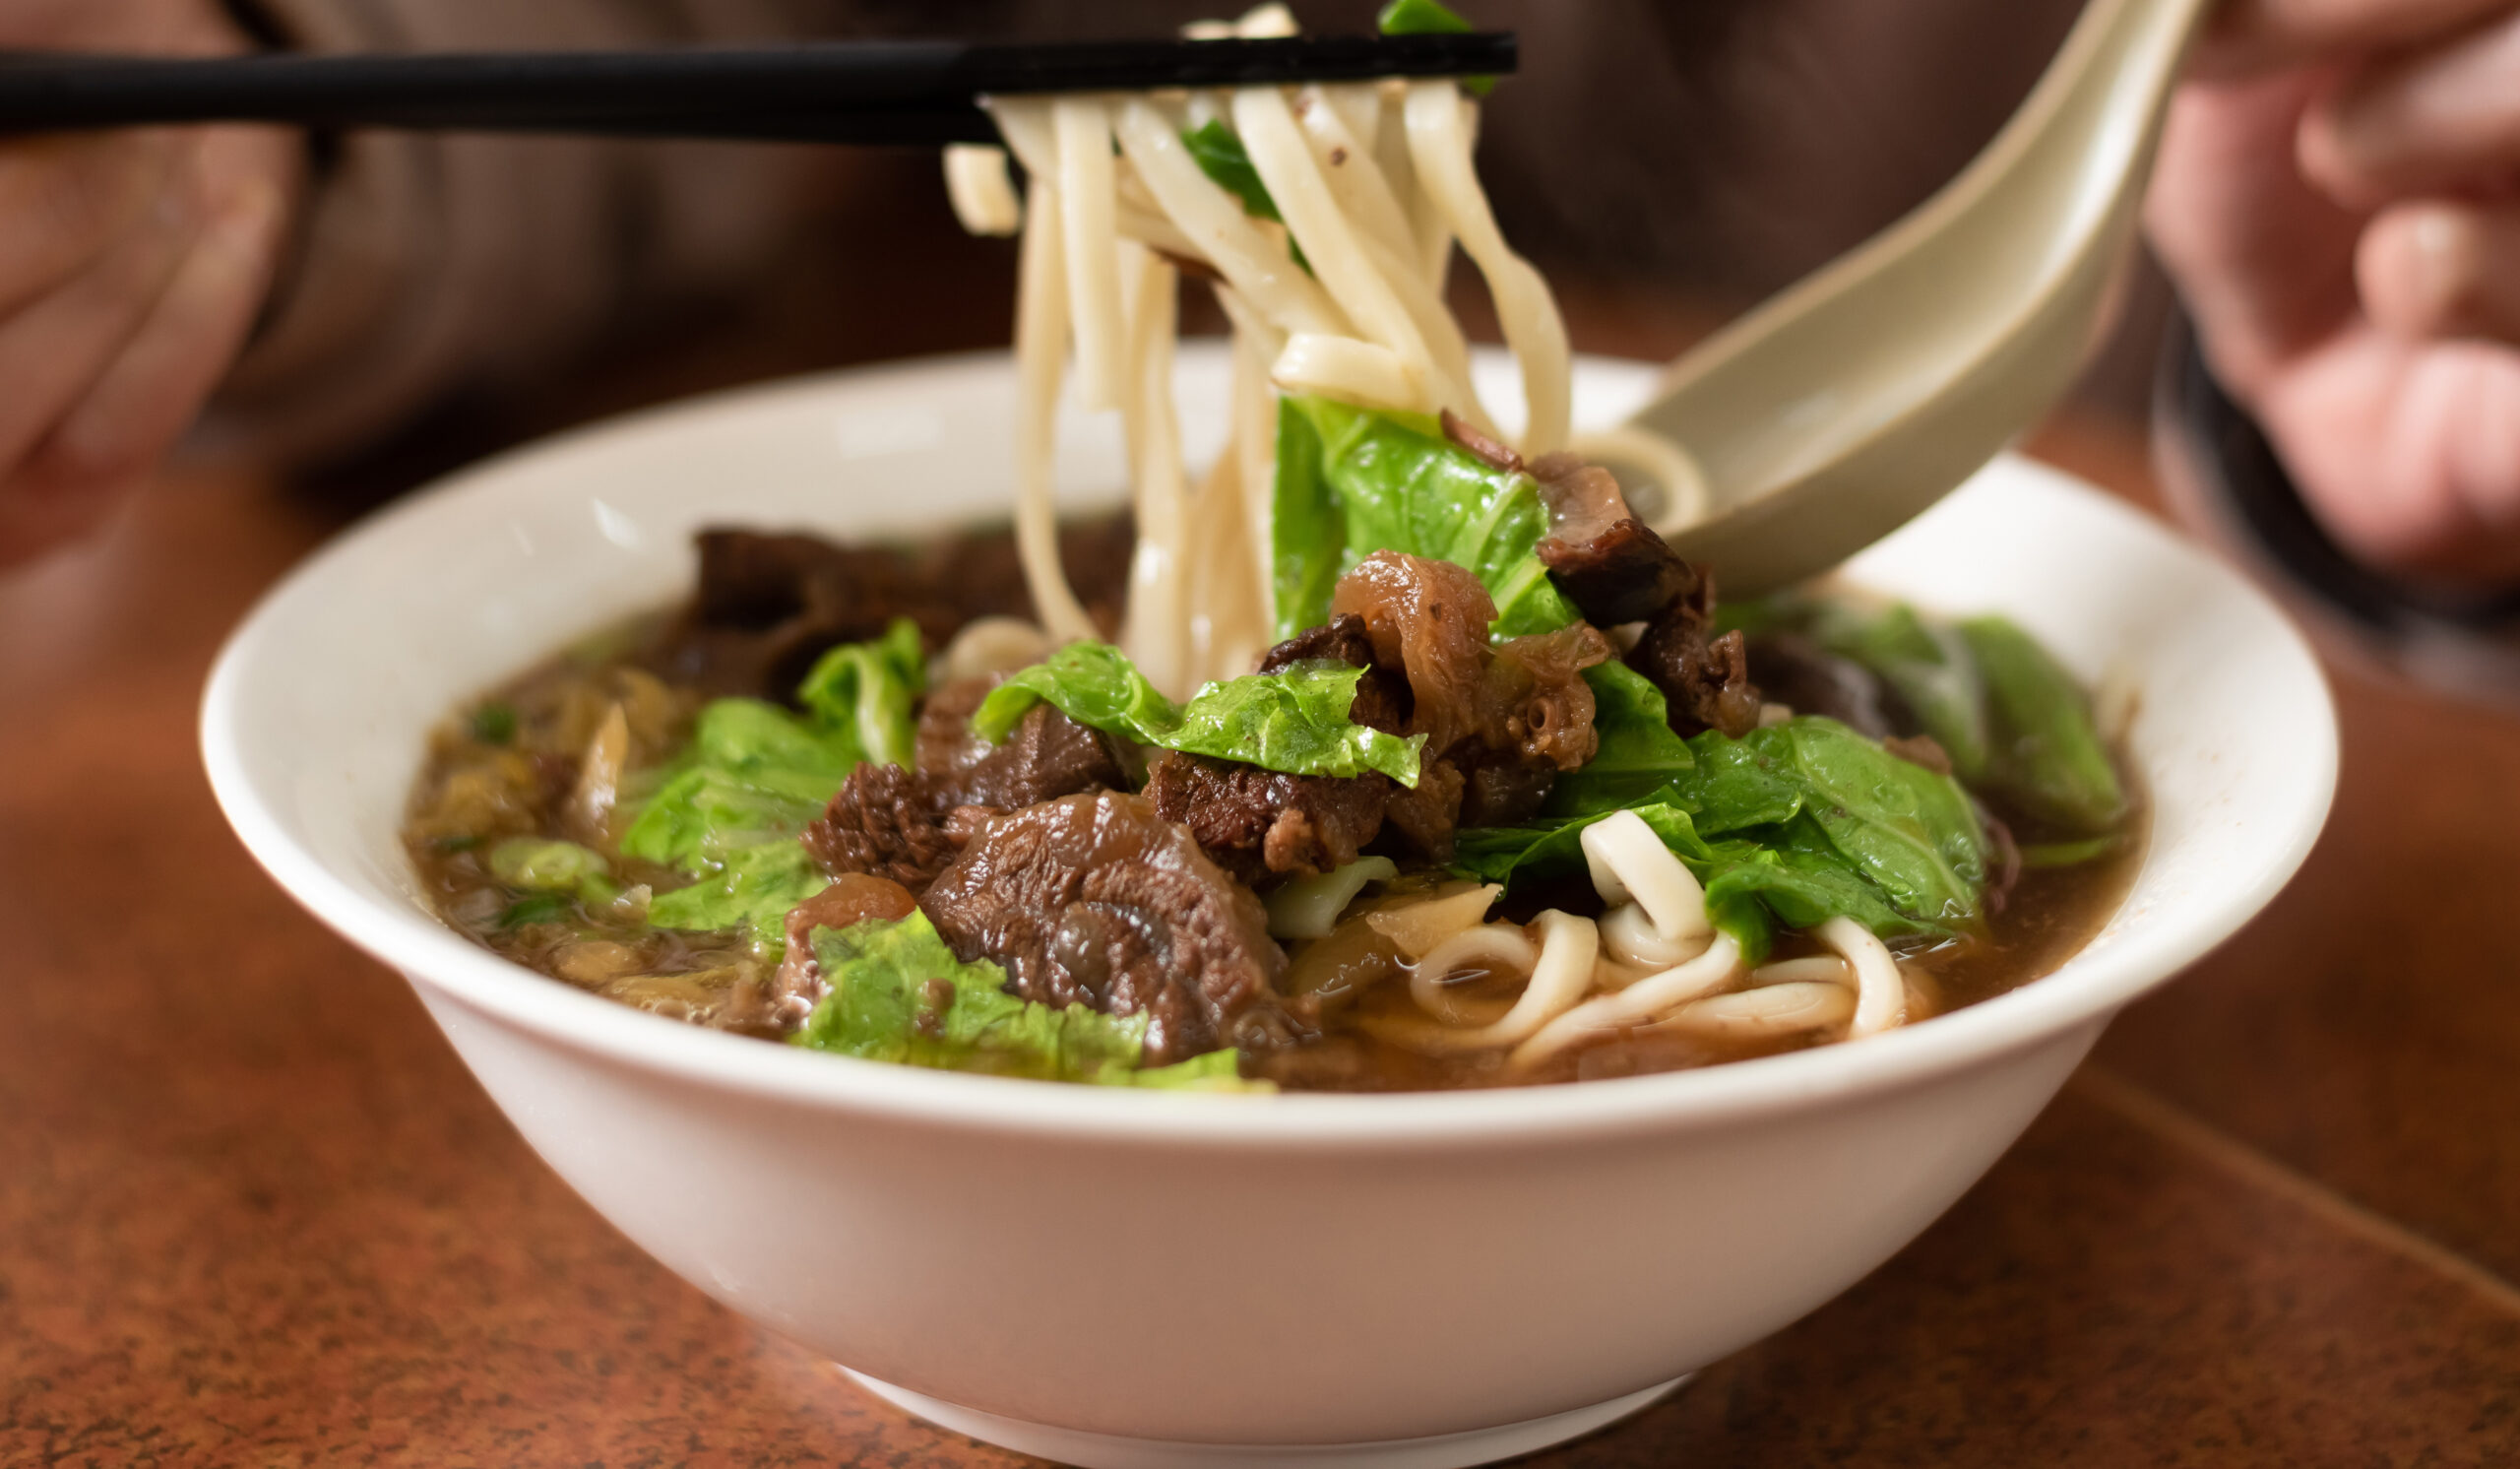 https://andrewzimmern.com/wp-content/uploads/Andrew-Zimmern-Recipe-Taiwanese-Beef-Noodle-Soup-scaled.jpg